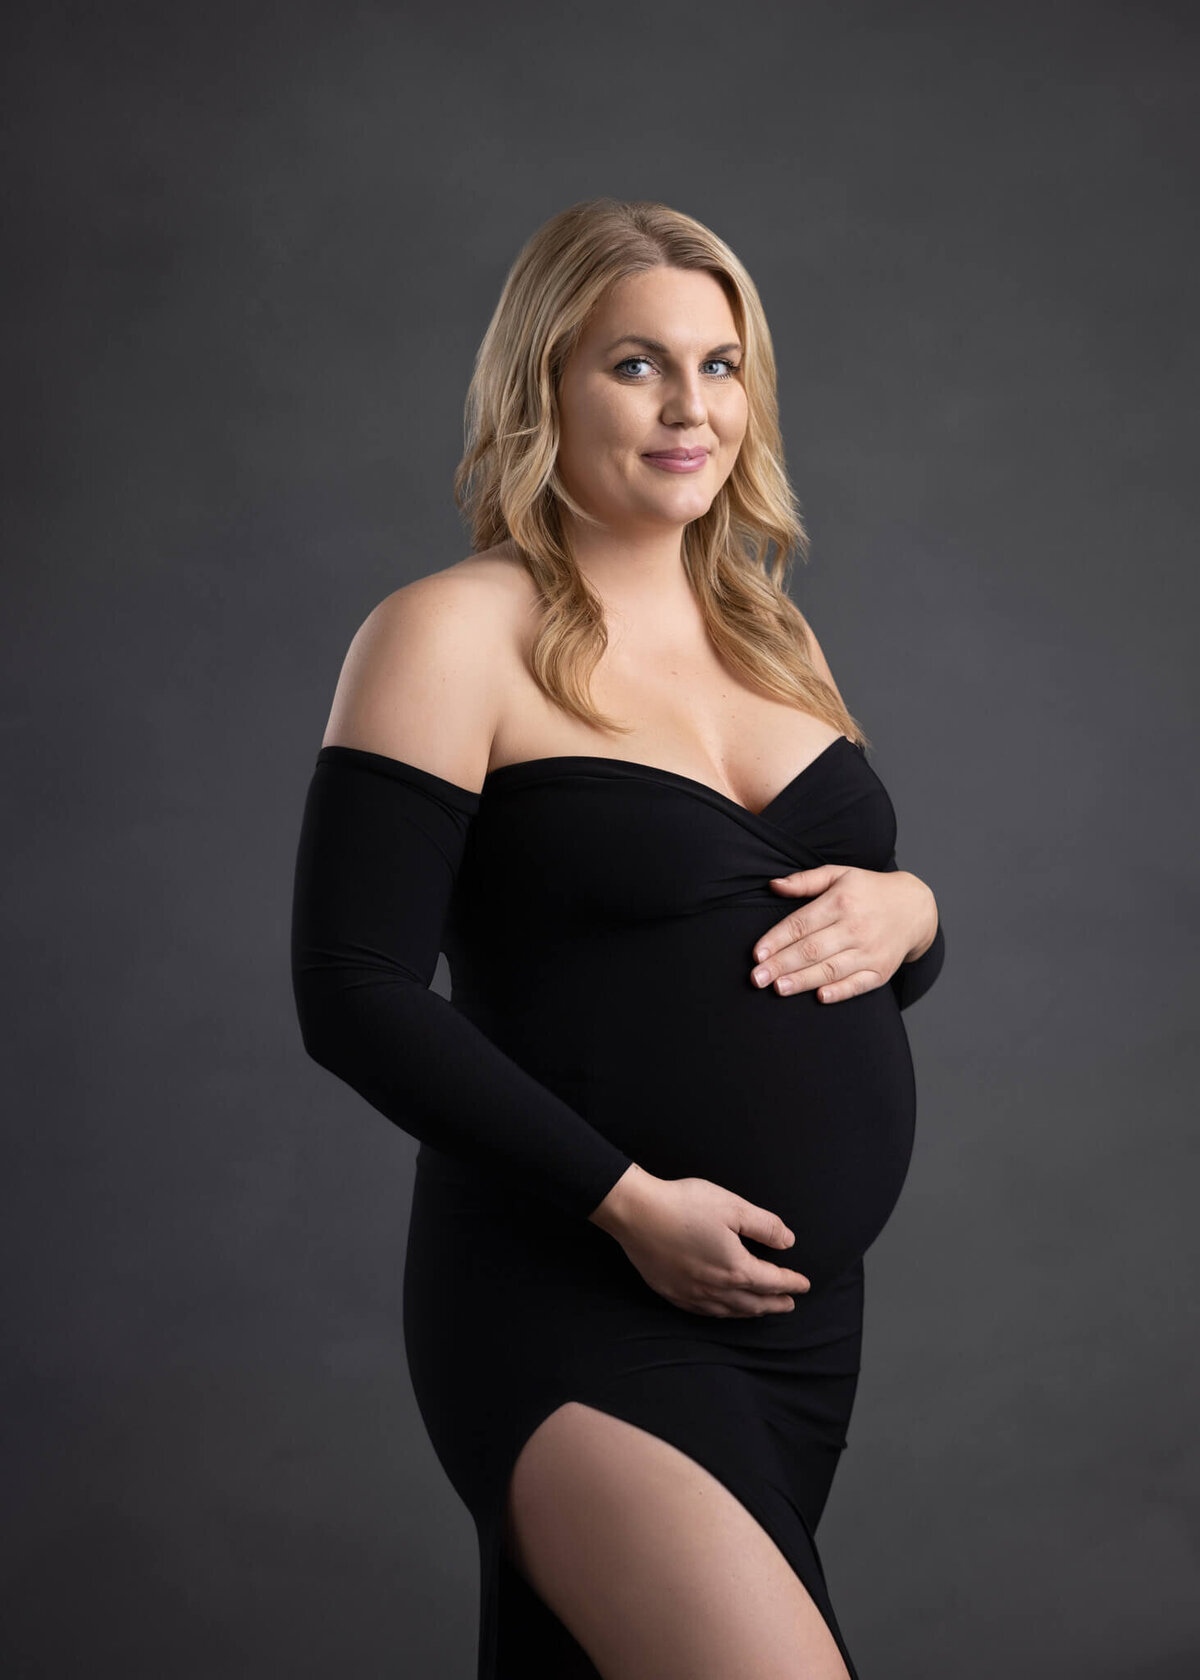 pregnant woman in a black dress holding her belly with both hands